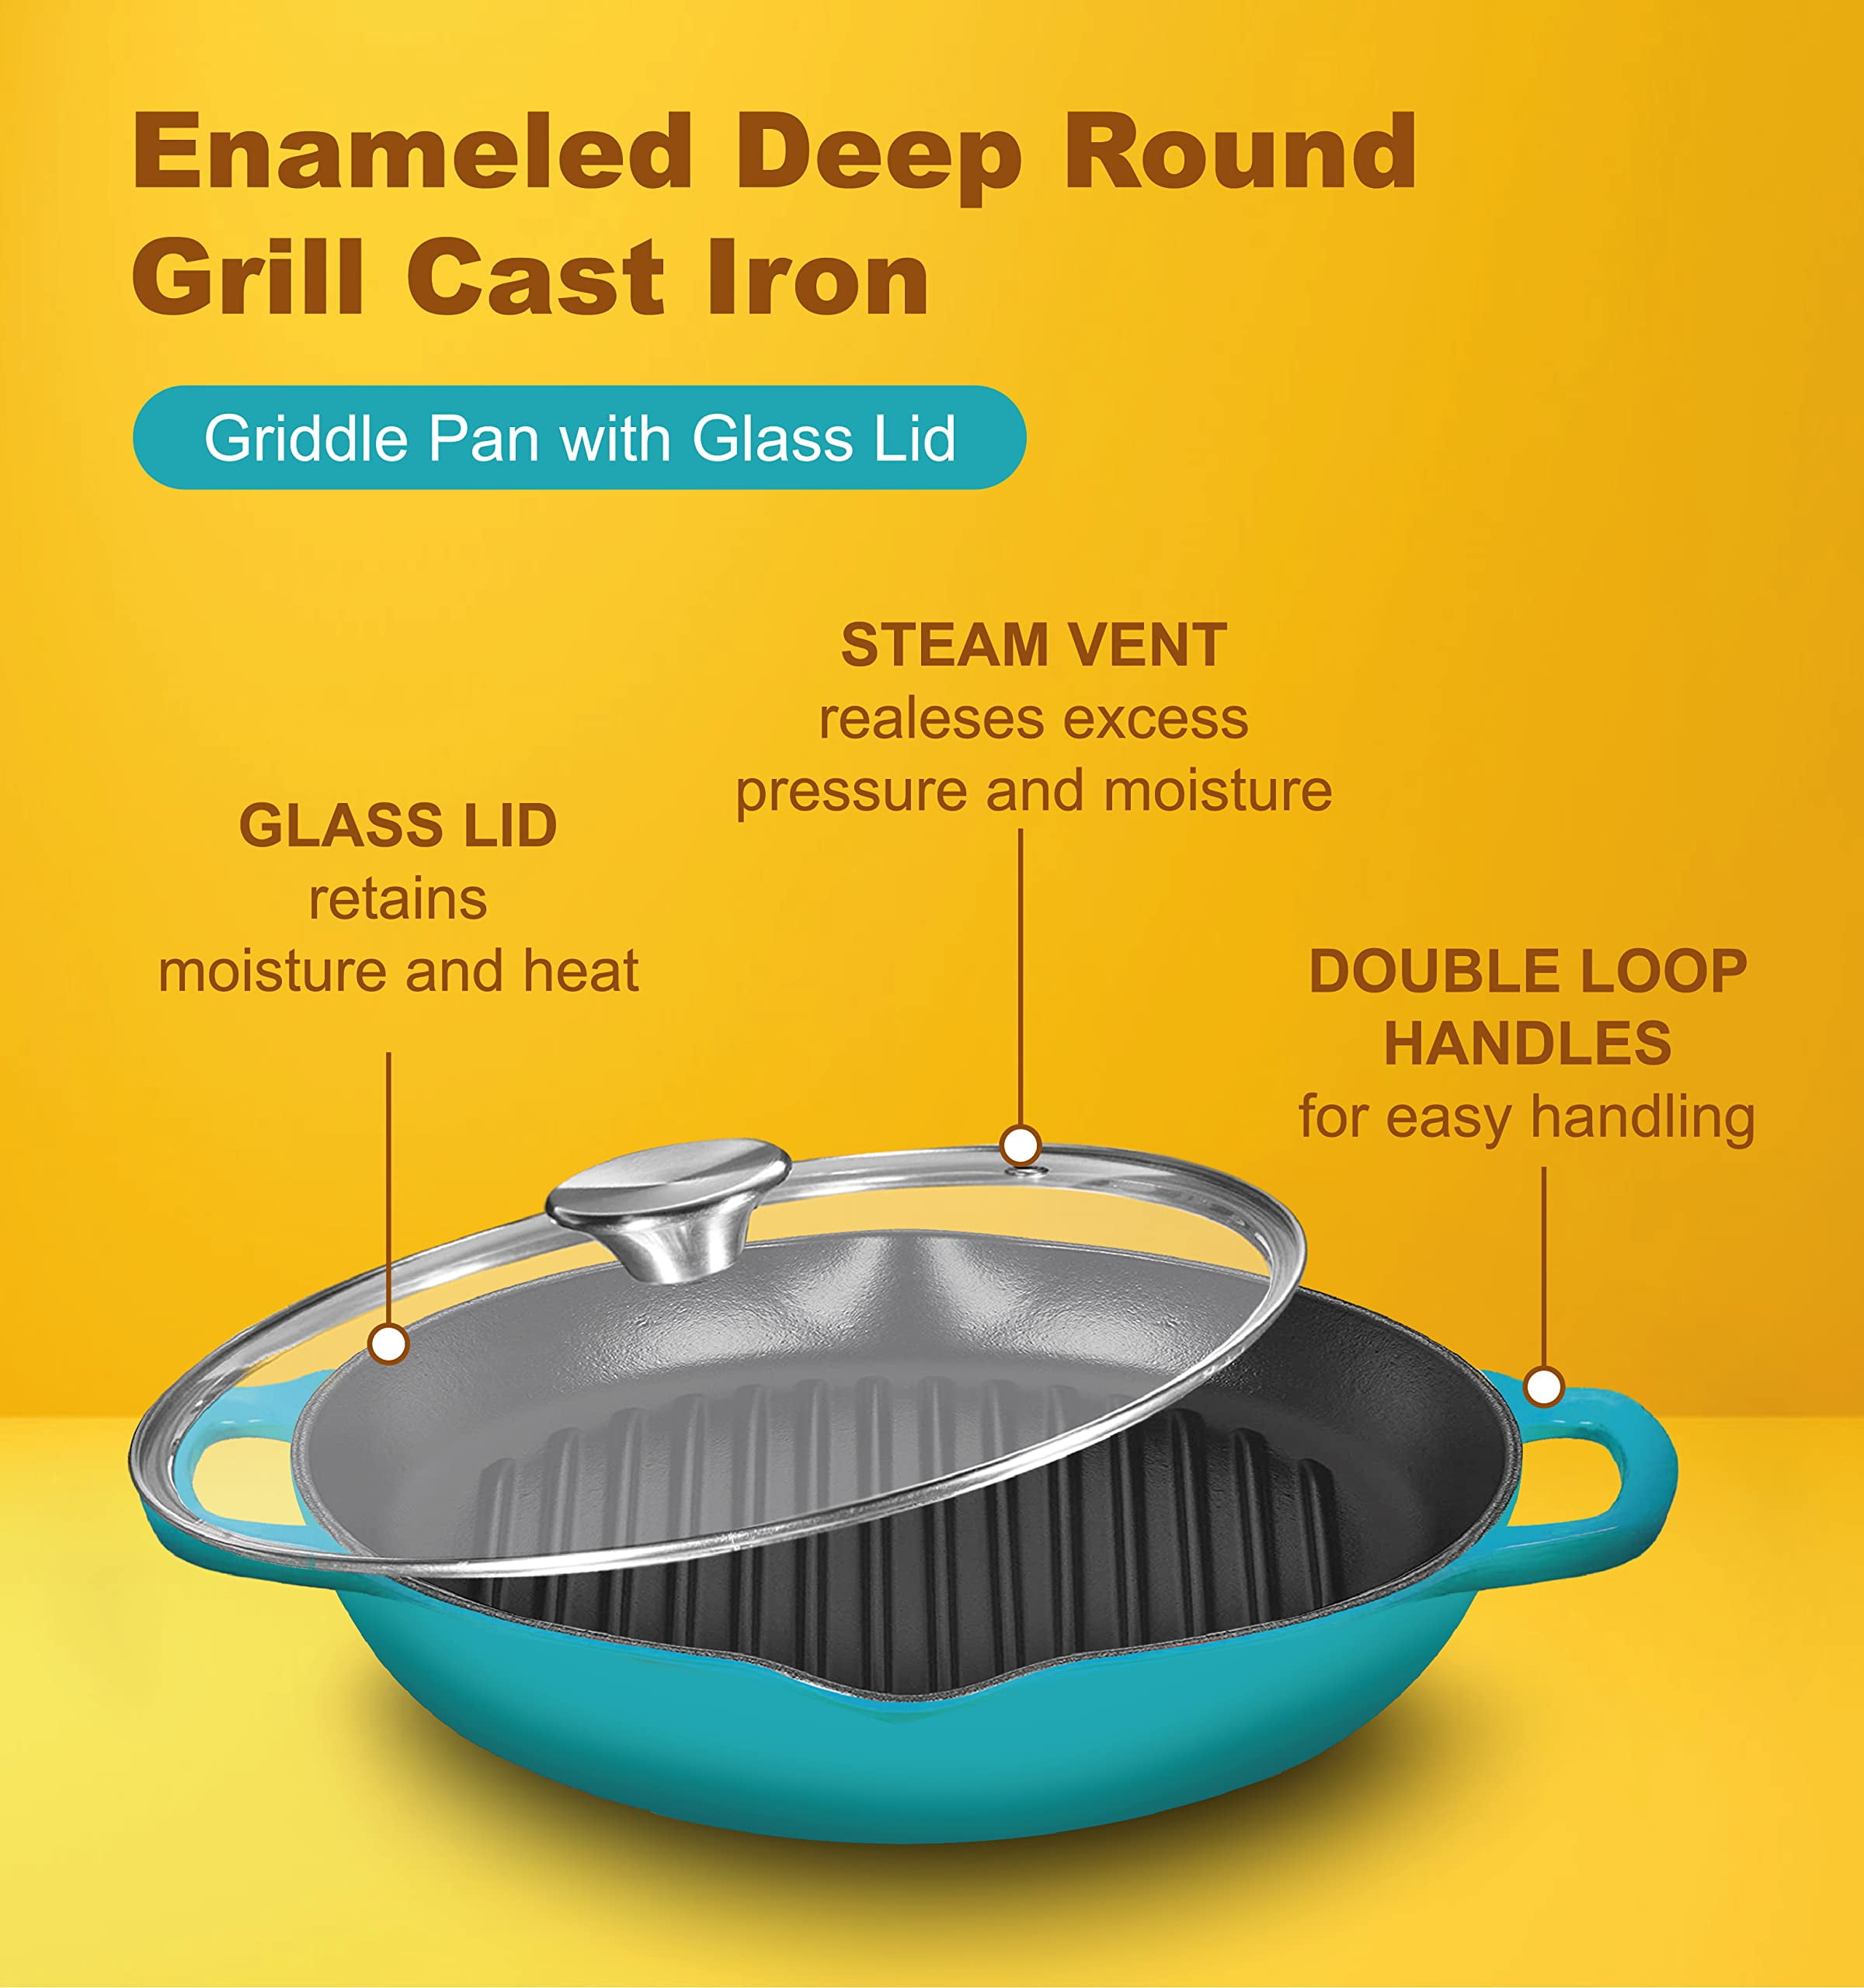 Uncoated Pizza Pan Cast Iron Round Griddle Healthy Thickened 10.24-Inch  Pre-Seasoned Griddle Pan for Gass Stove with Wooden Helper Handle Pizza